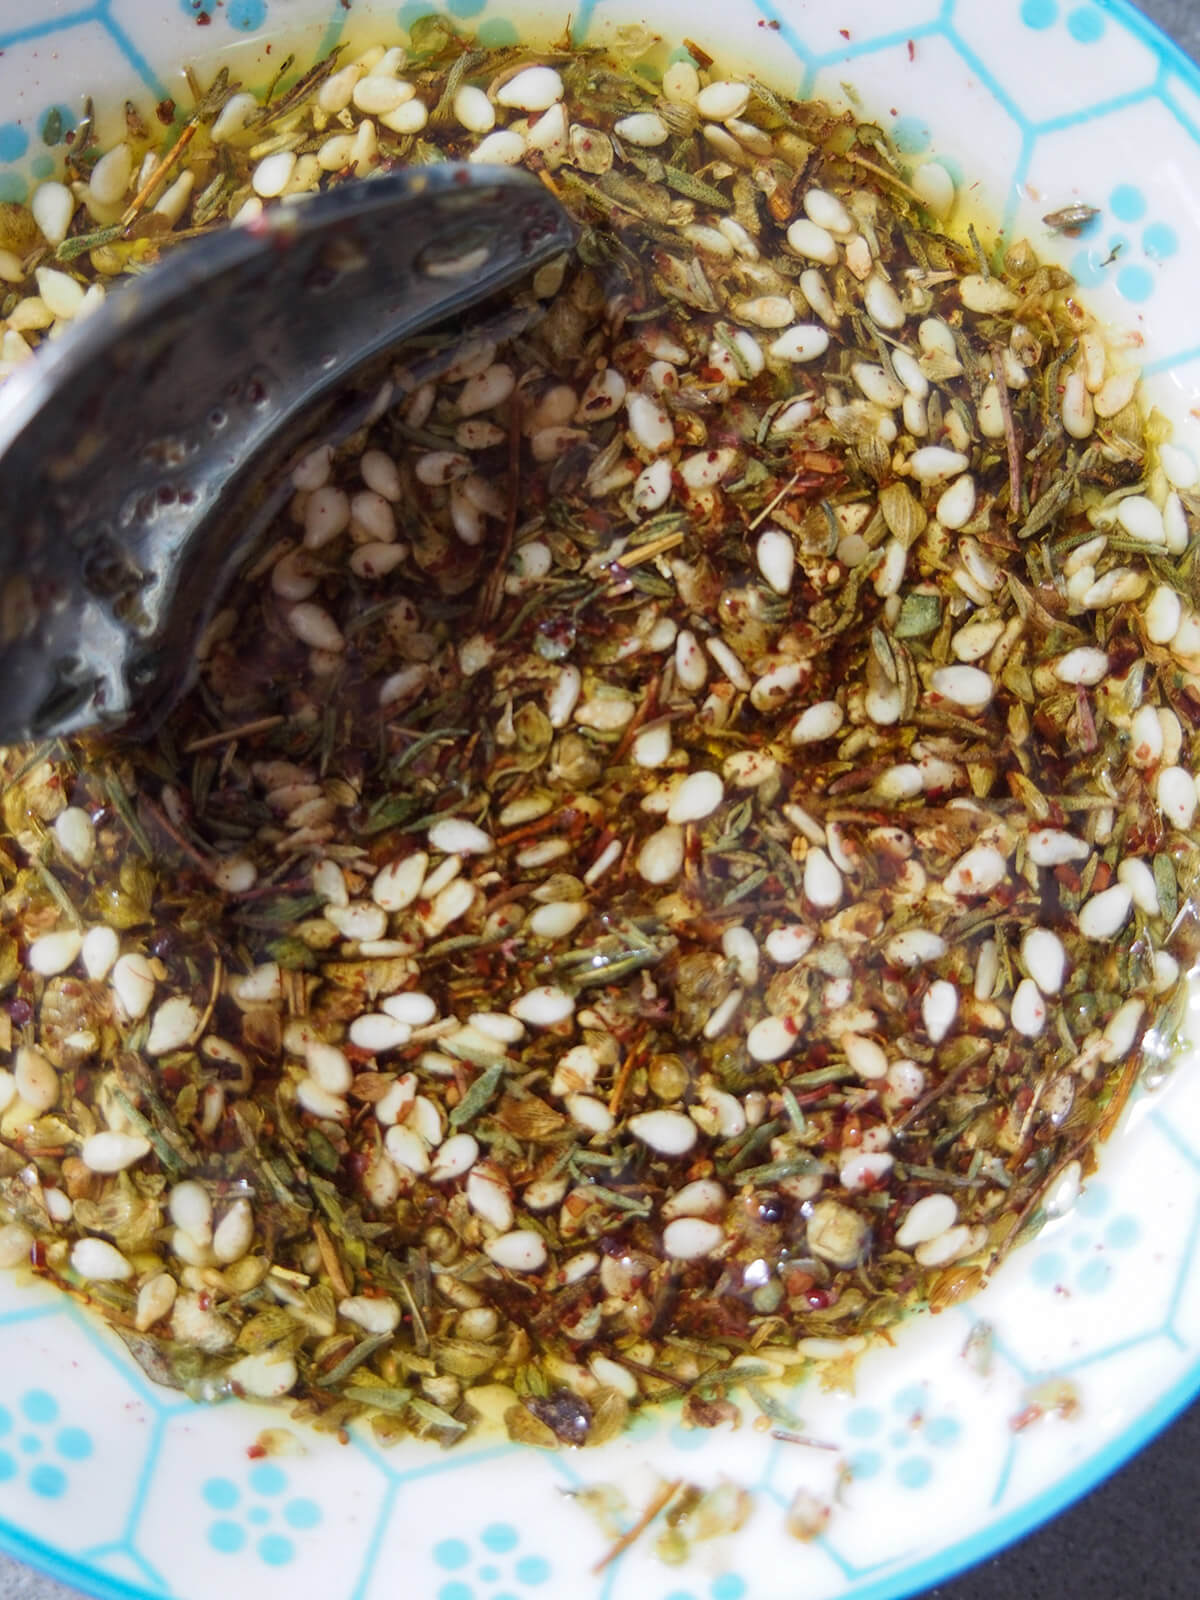 za'atar and oil mixed together in small dish